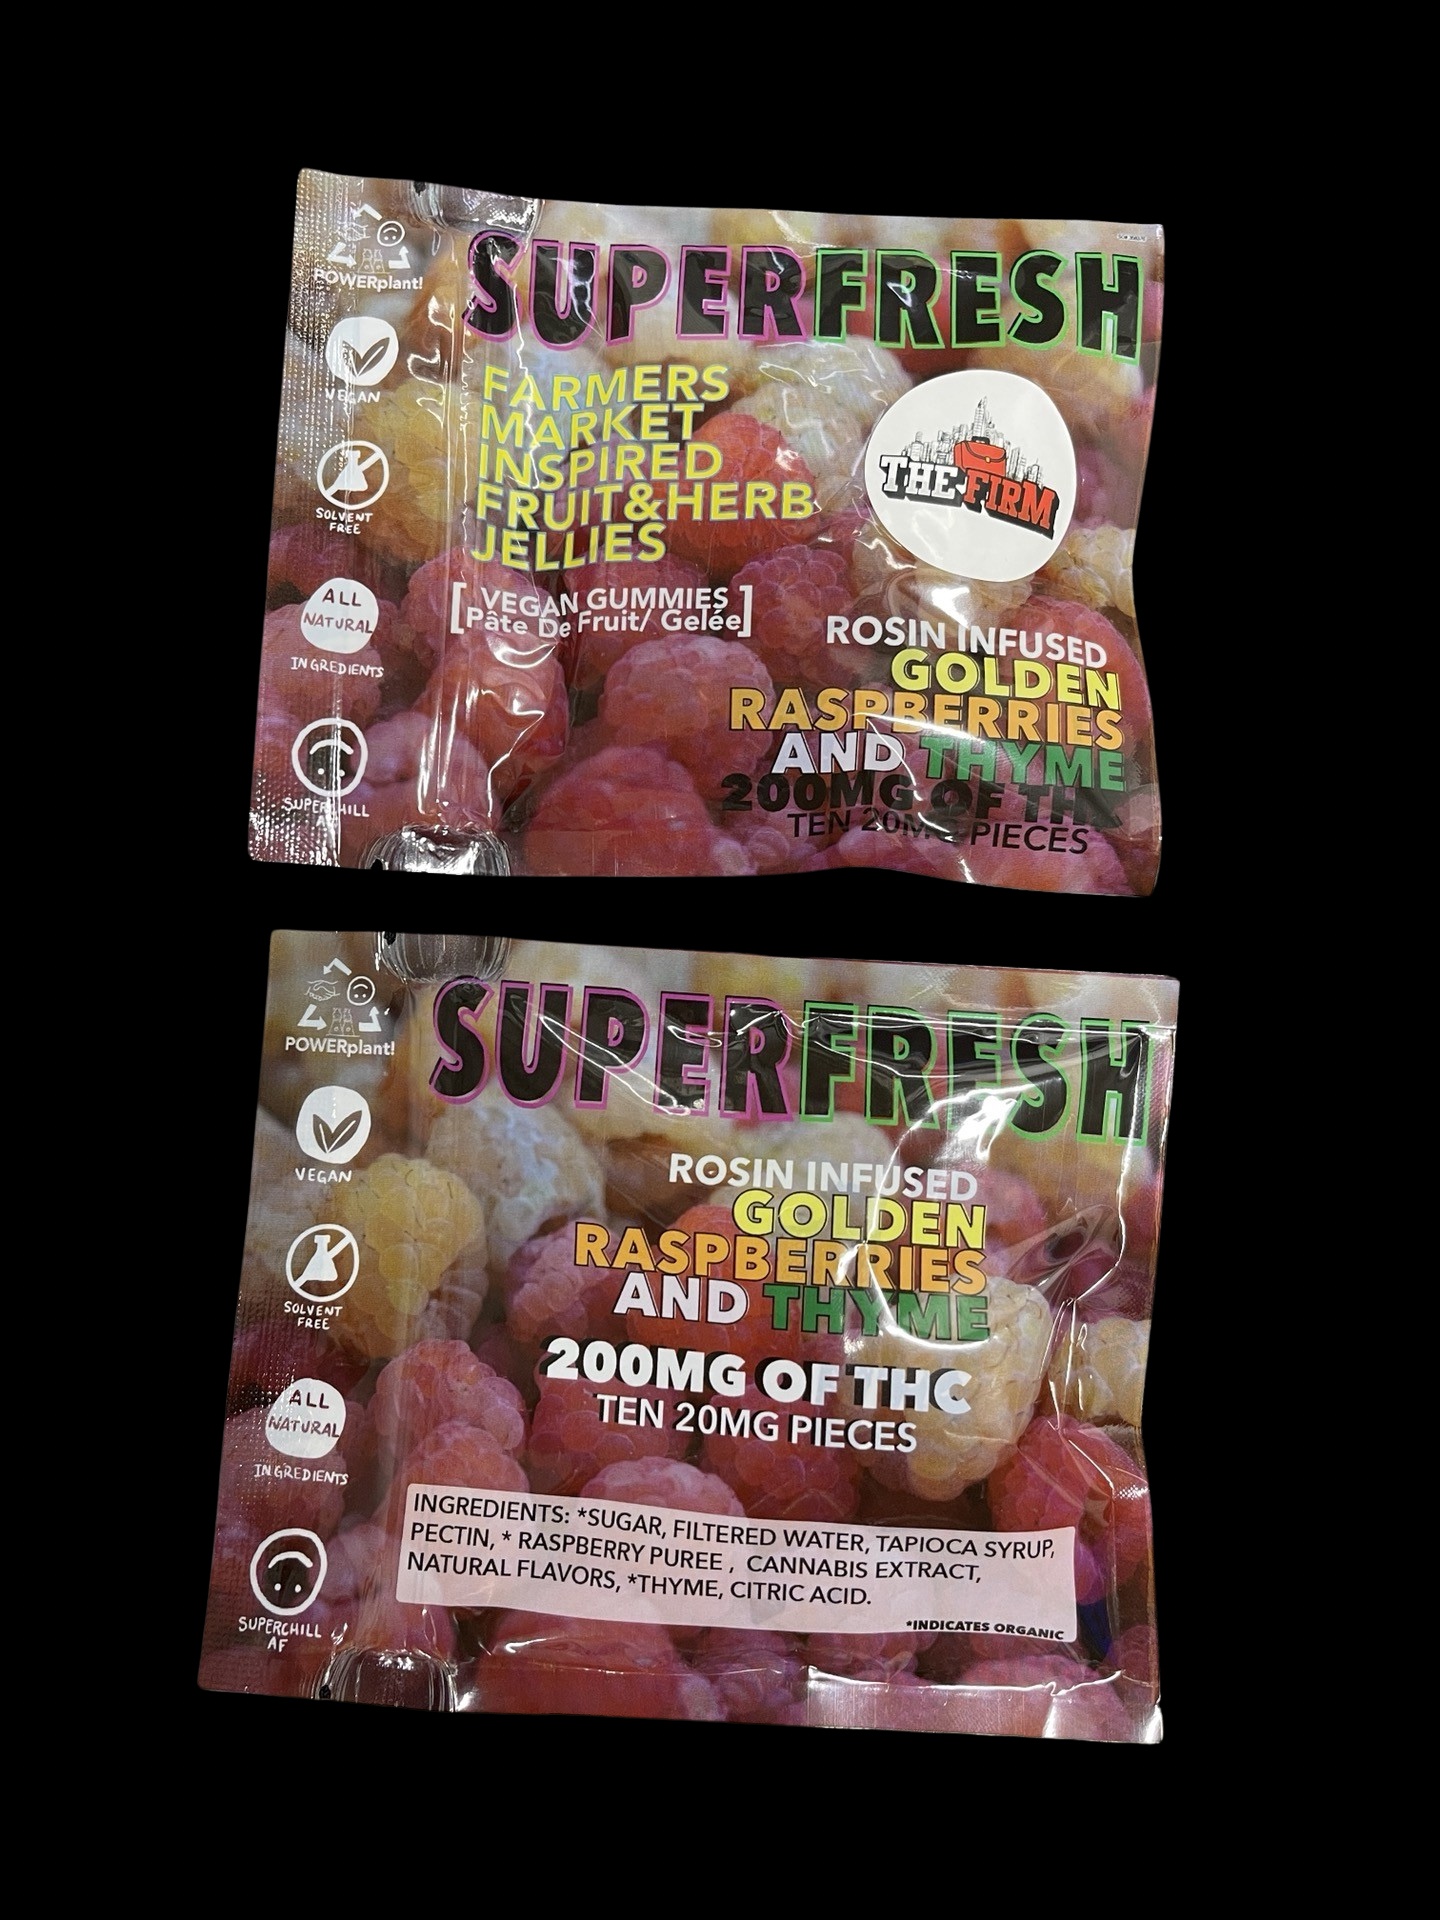 Superchill X The Firm  - Golden Raspberries and Thyme Jellies 200mg